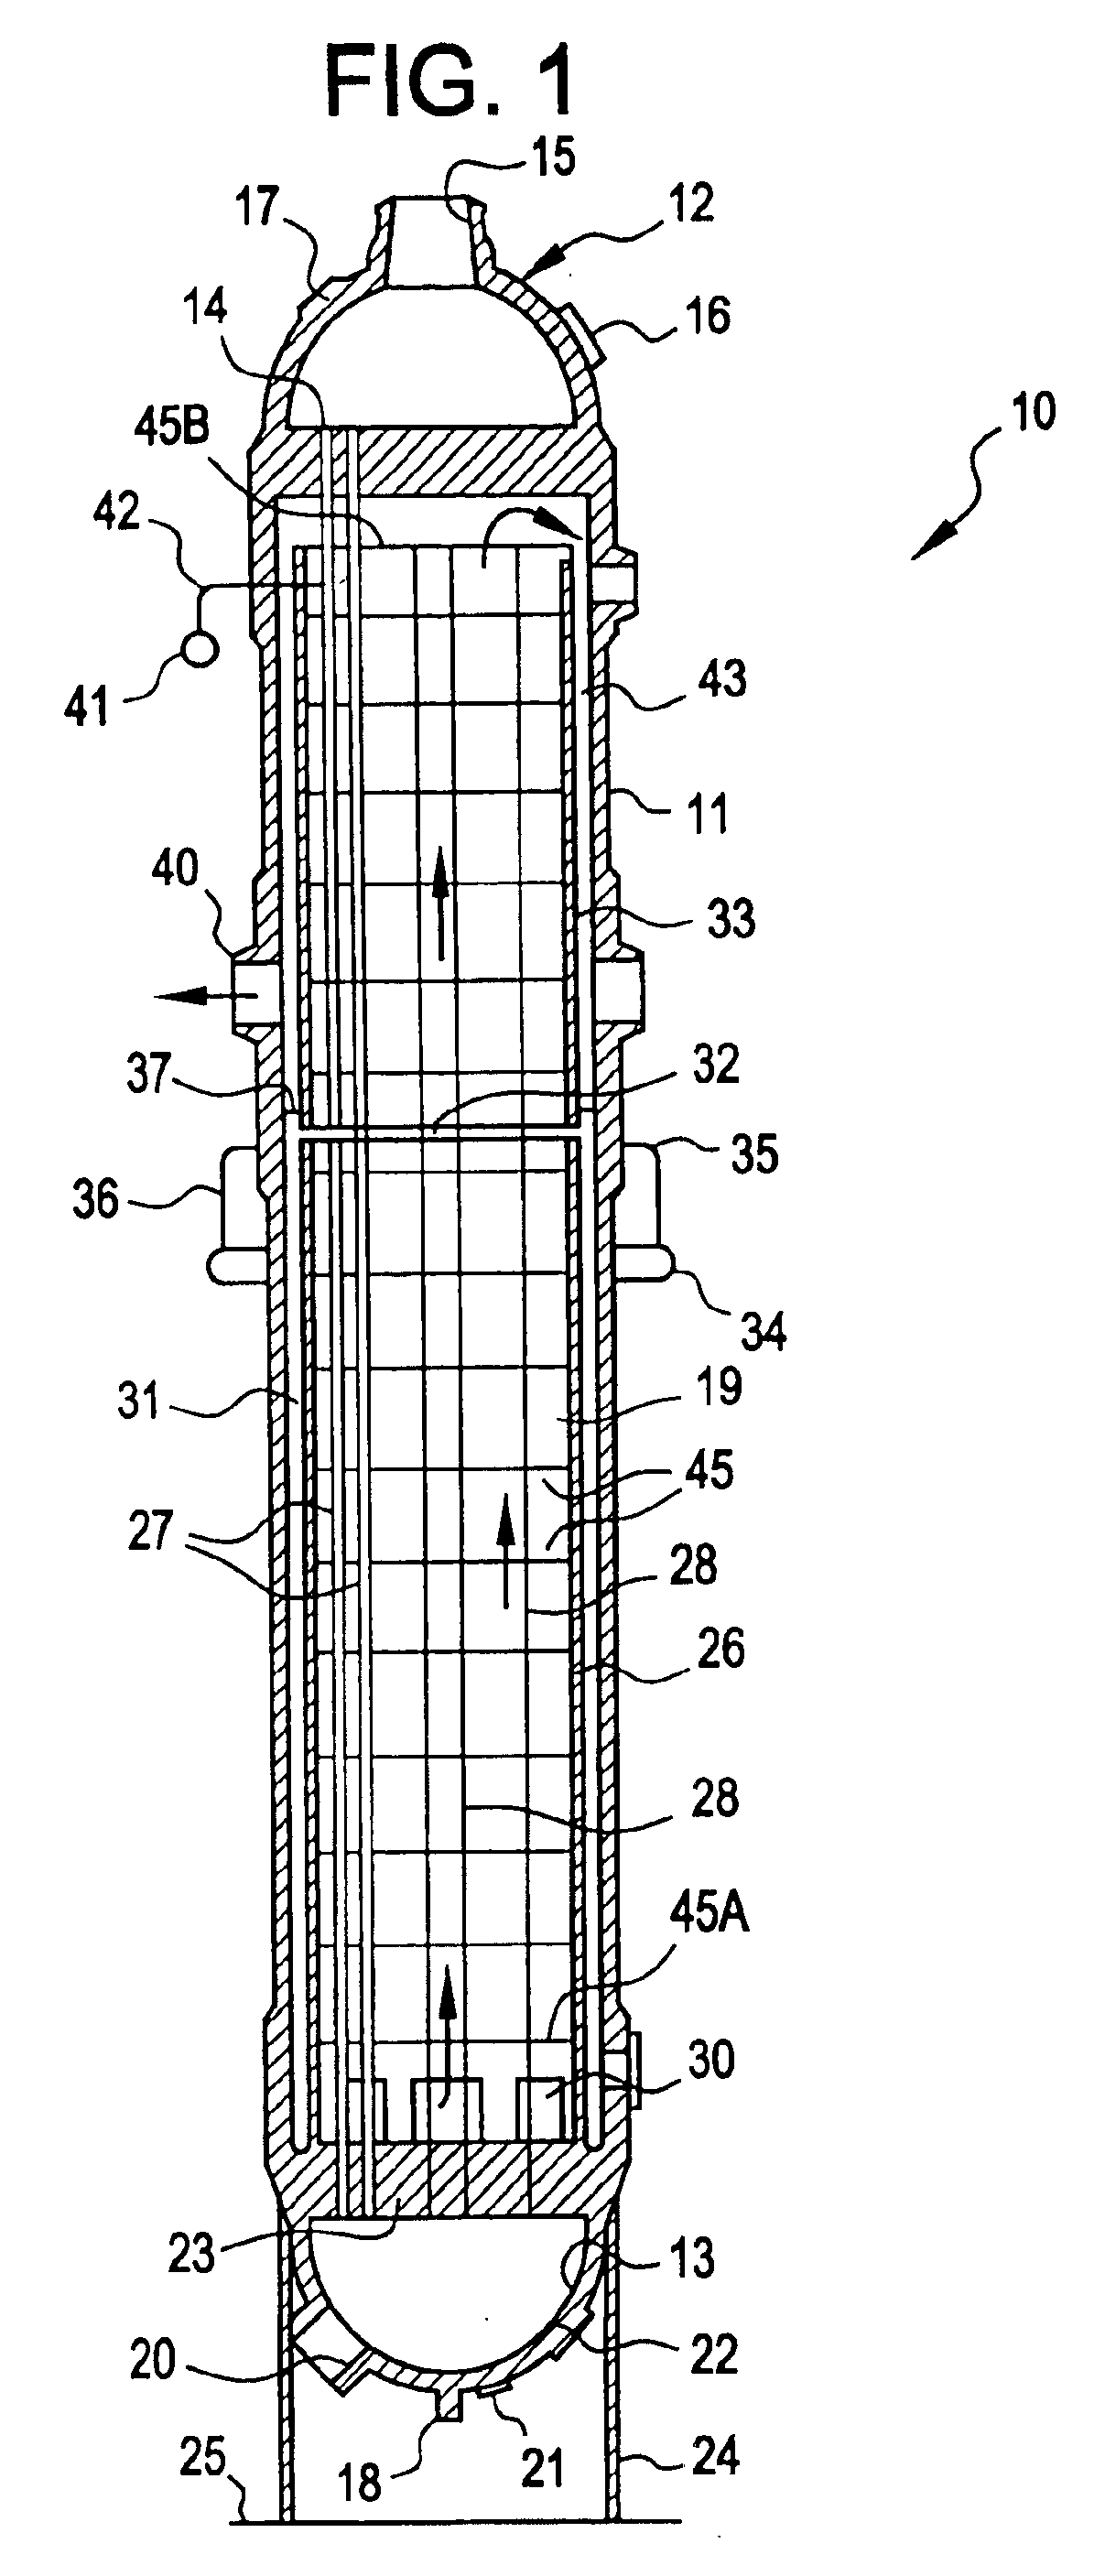 Heat exchanger tube support structure